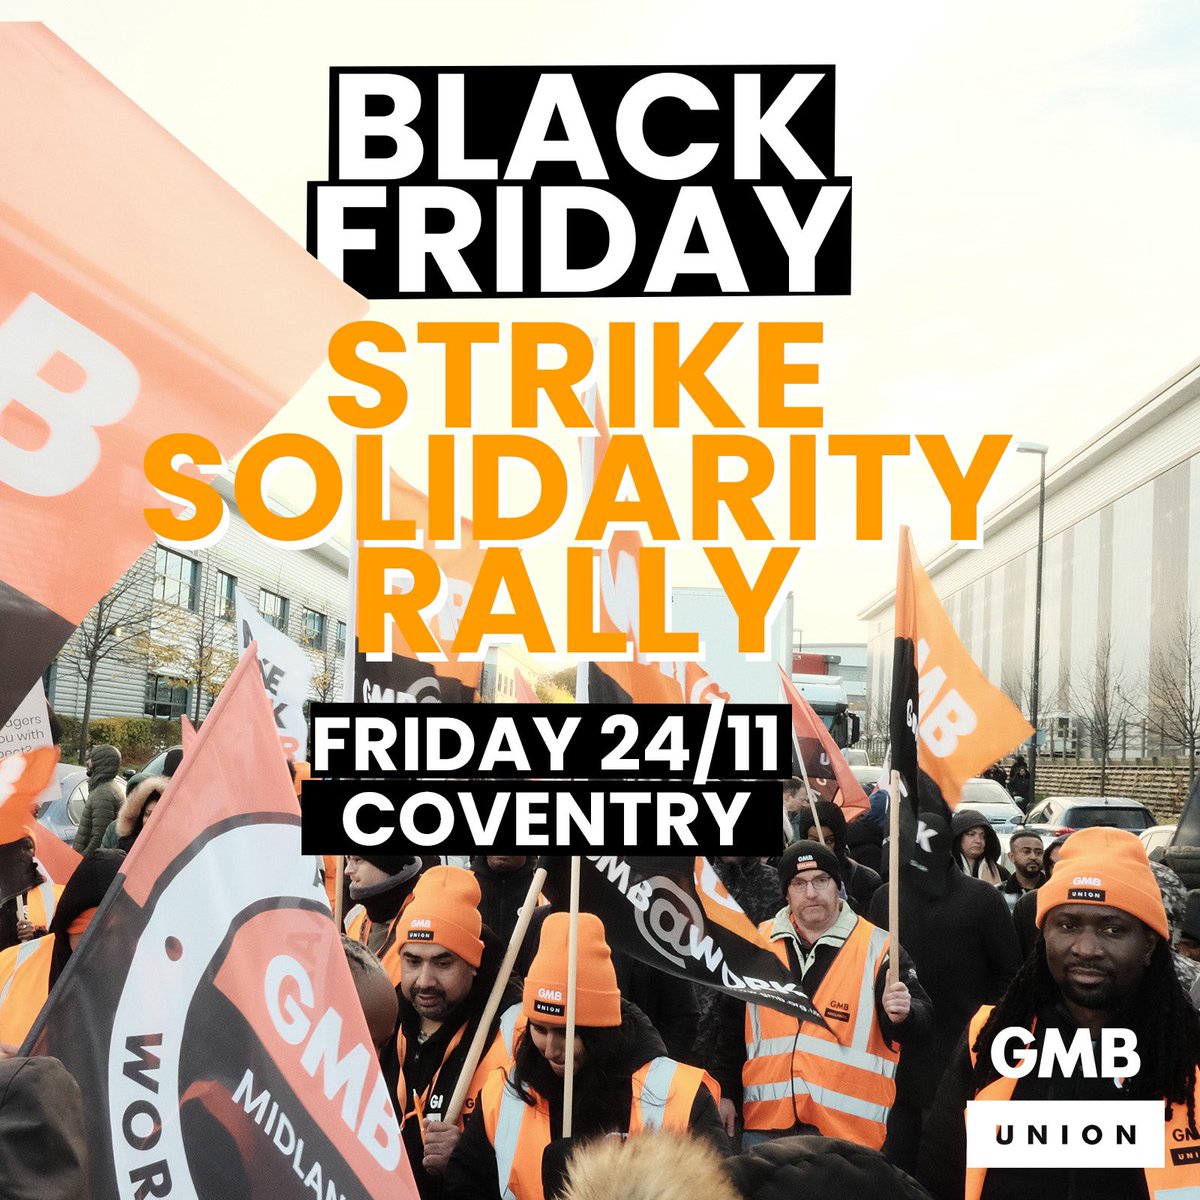 THIS FRIDAY ⬇️ Show solidarity with Amazon workers taking action this #BlackFriday. 🗓️ Friday 24/11 from 7.30AM 📍 Outside Amazon Coventry Join the strike solidarity rally.